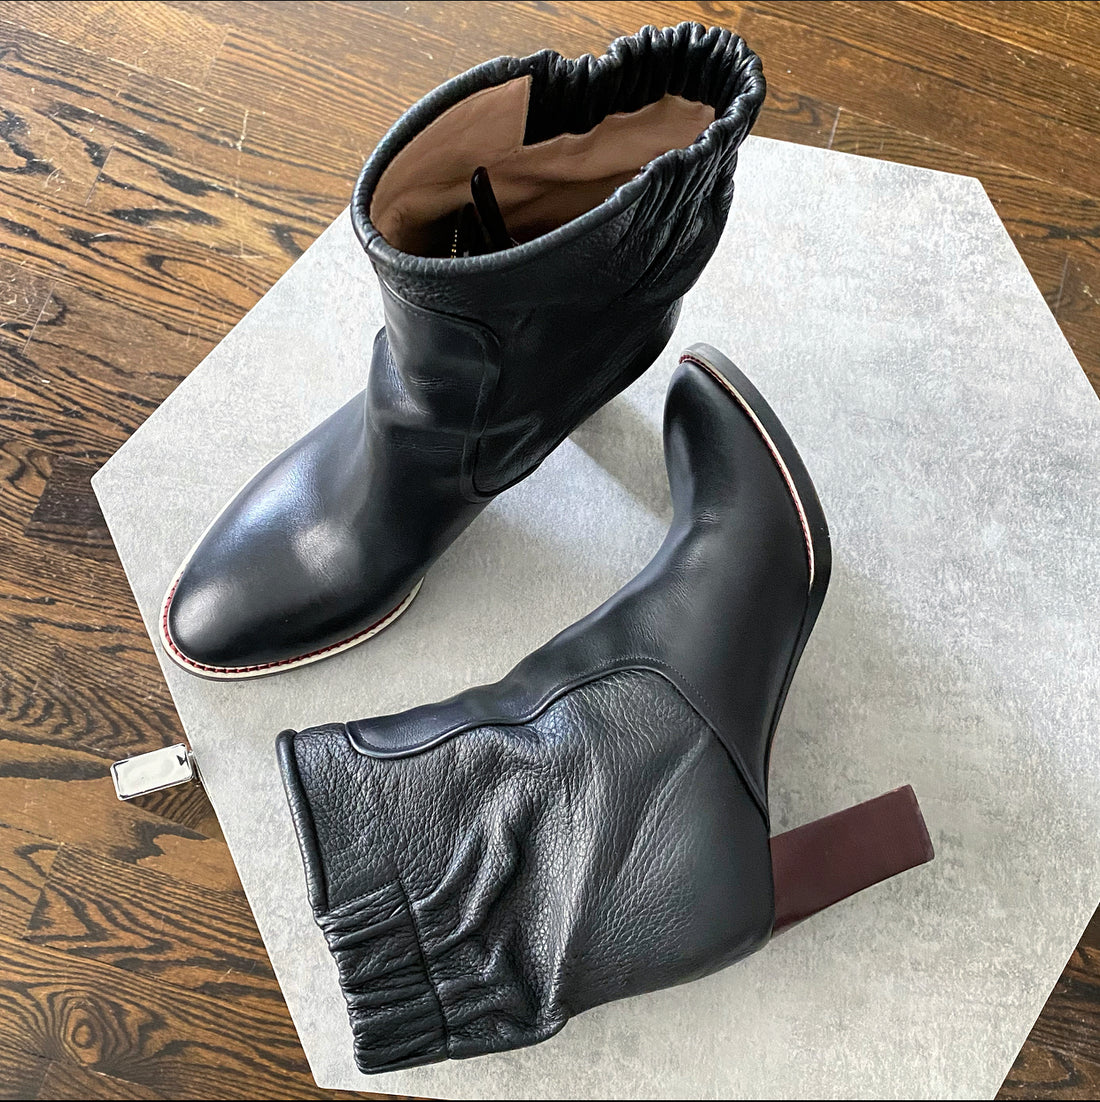 Chloe Black Leather Ankle Boots - 37.5